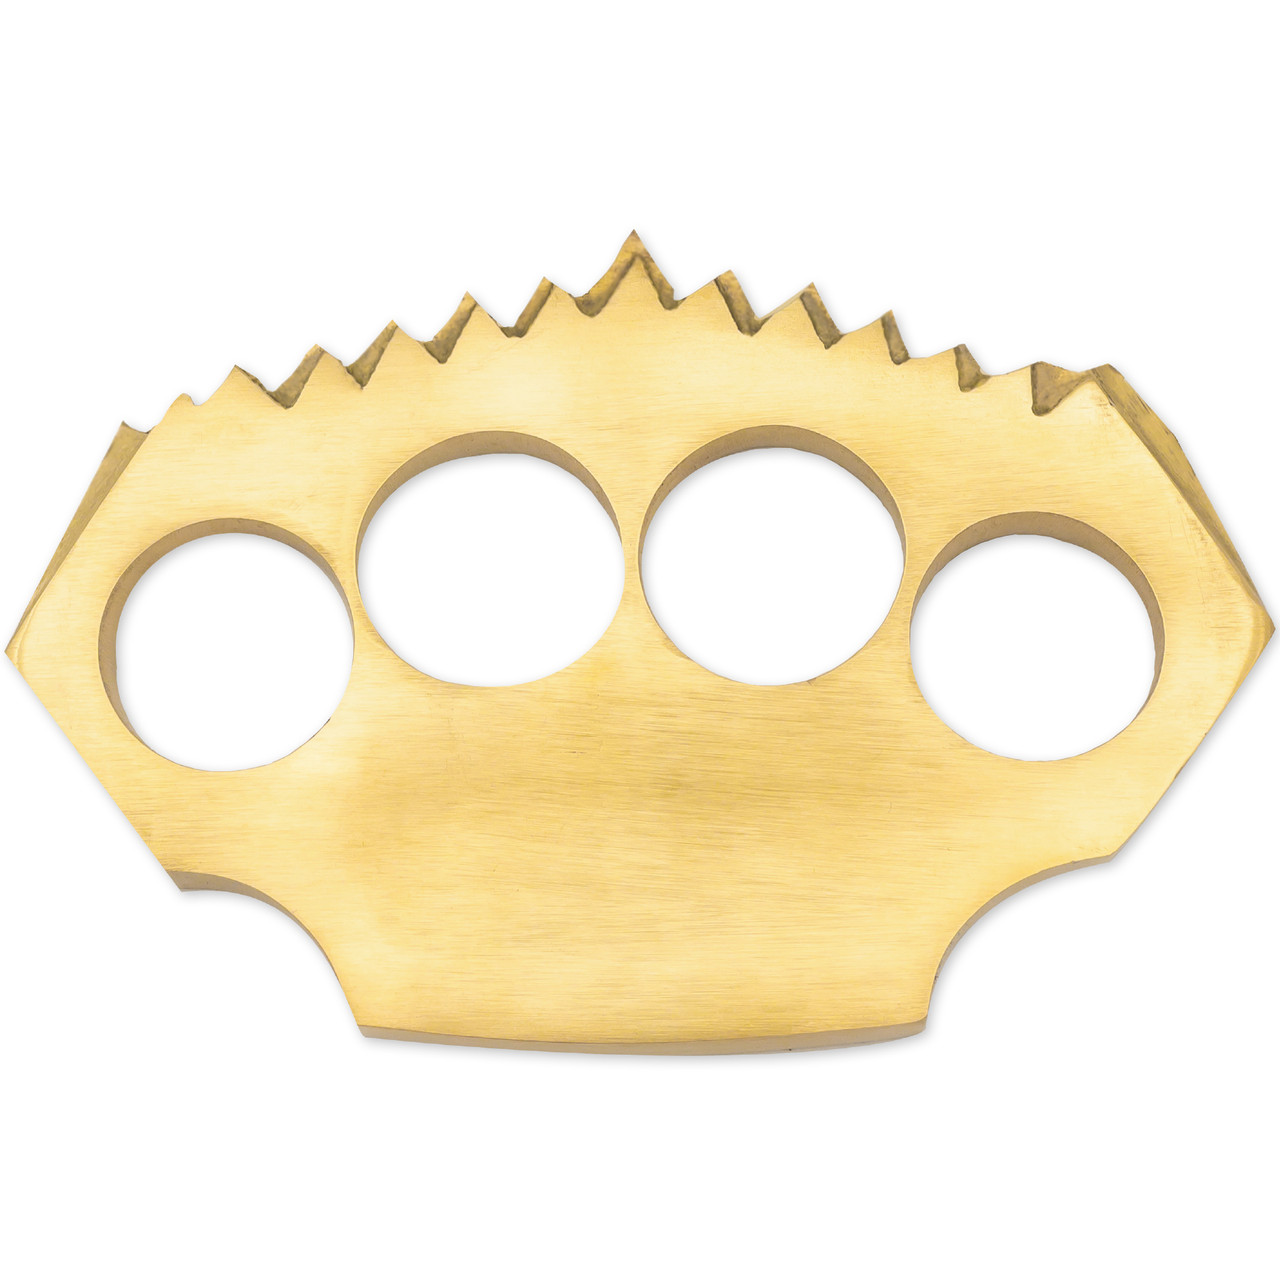 To the Death 100% Pure Brass Knuckle Paper Weight Accessory - Kaswords.com